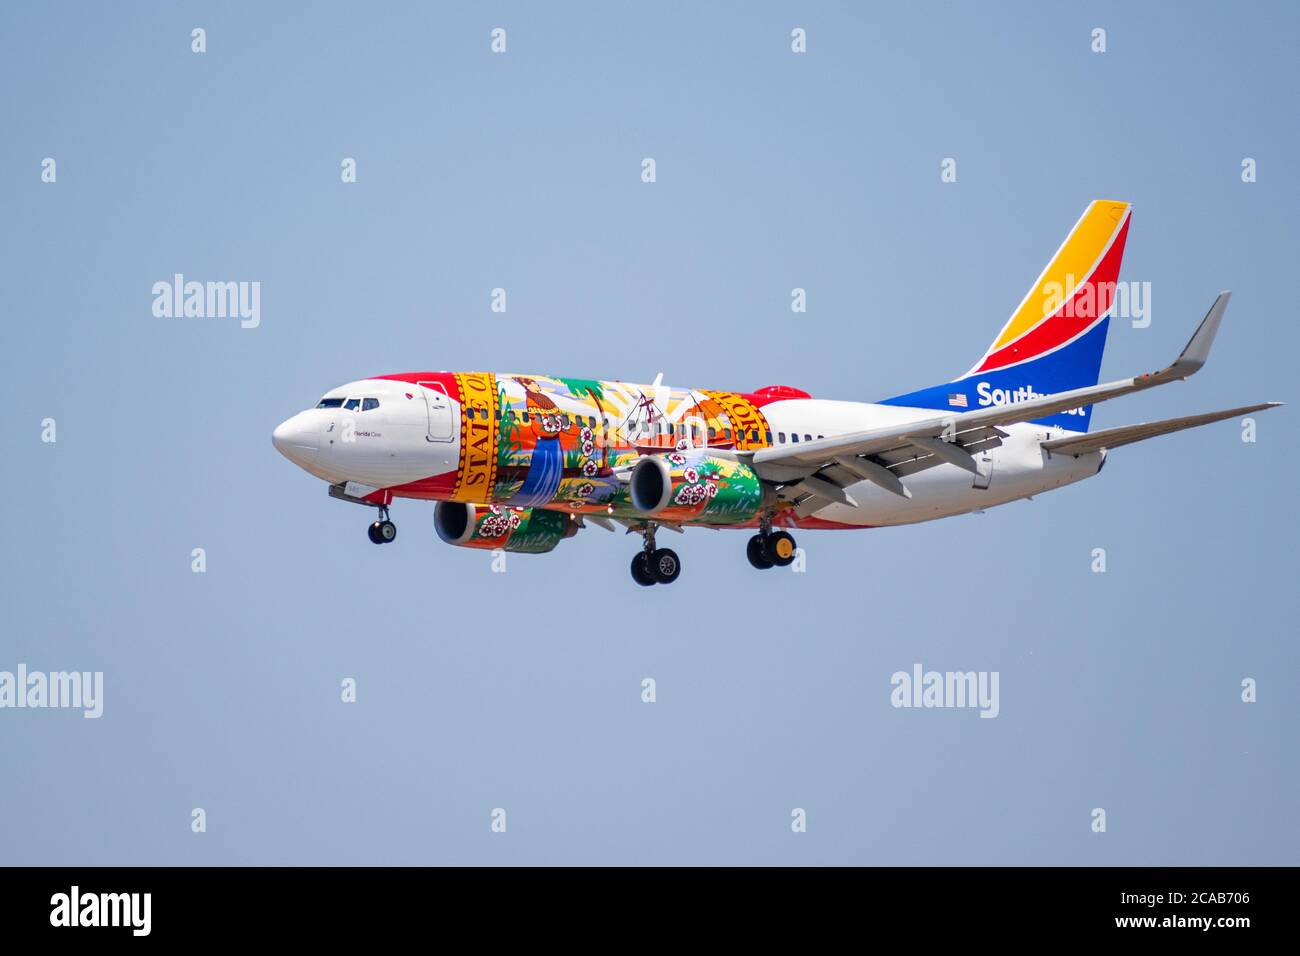 July 25, 2020 San Jose / CA / USA - Florida One Southwest Airlines landing at San Jose International Airport (SJC); Florida One livery is honoring and Stock Photo